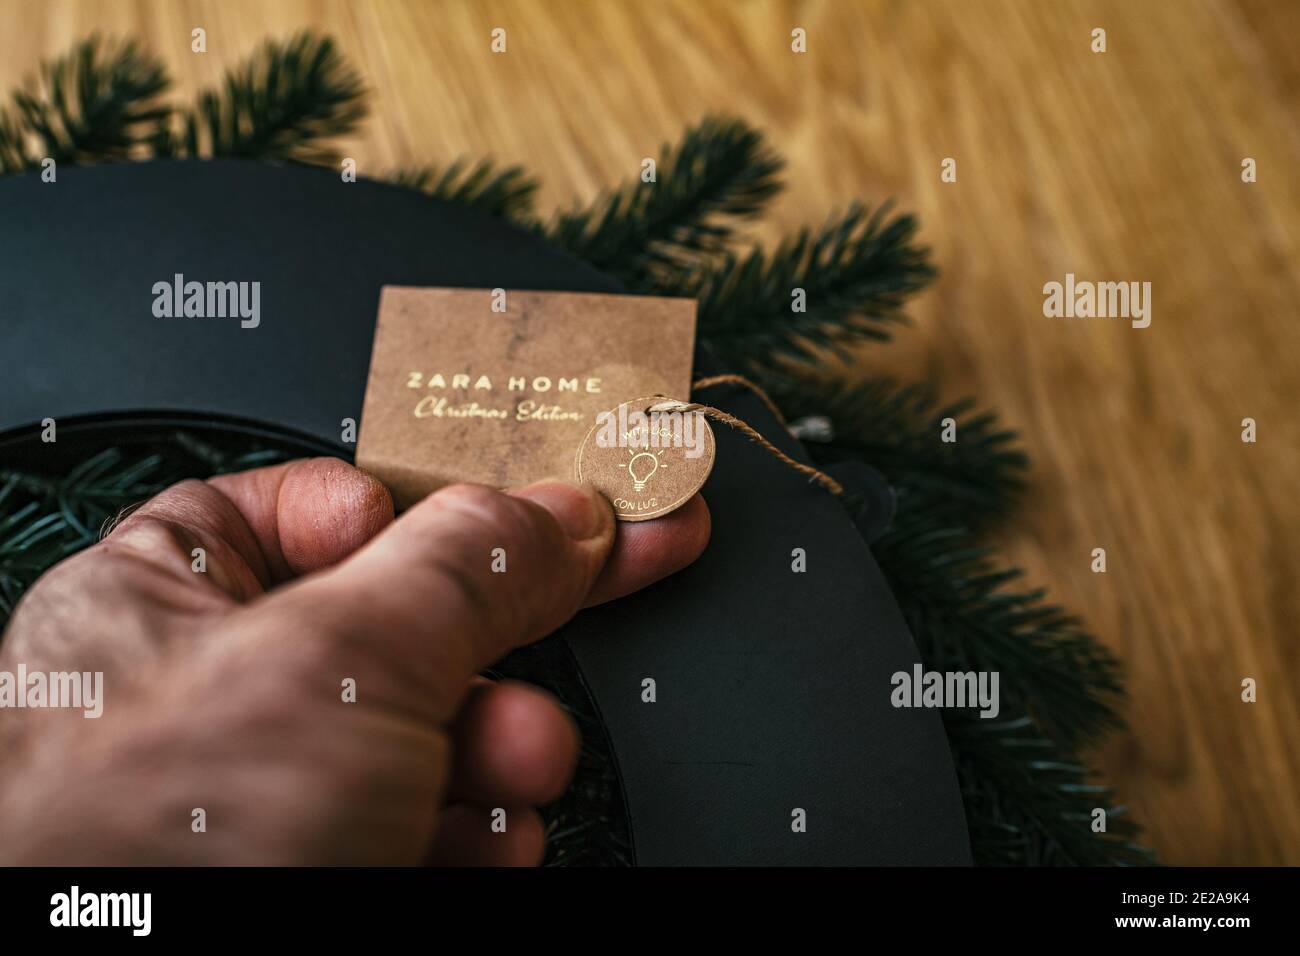 Paris, France - Dec 13, 2020: POV male hand holding Zara home Christmas  Edition price tag with light metnion on the recycled paper on a decorative  wreath for home Stock Photo - Alamy